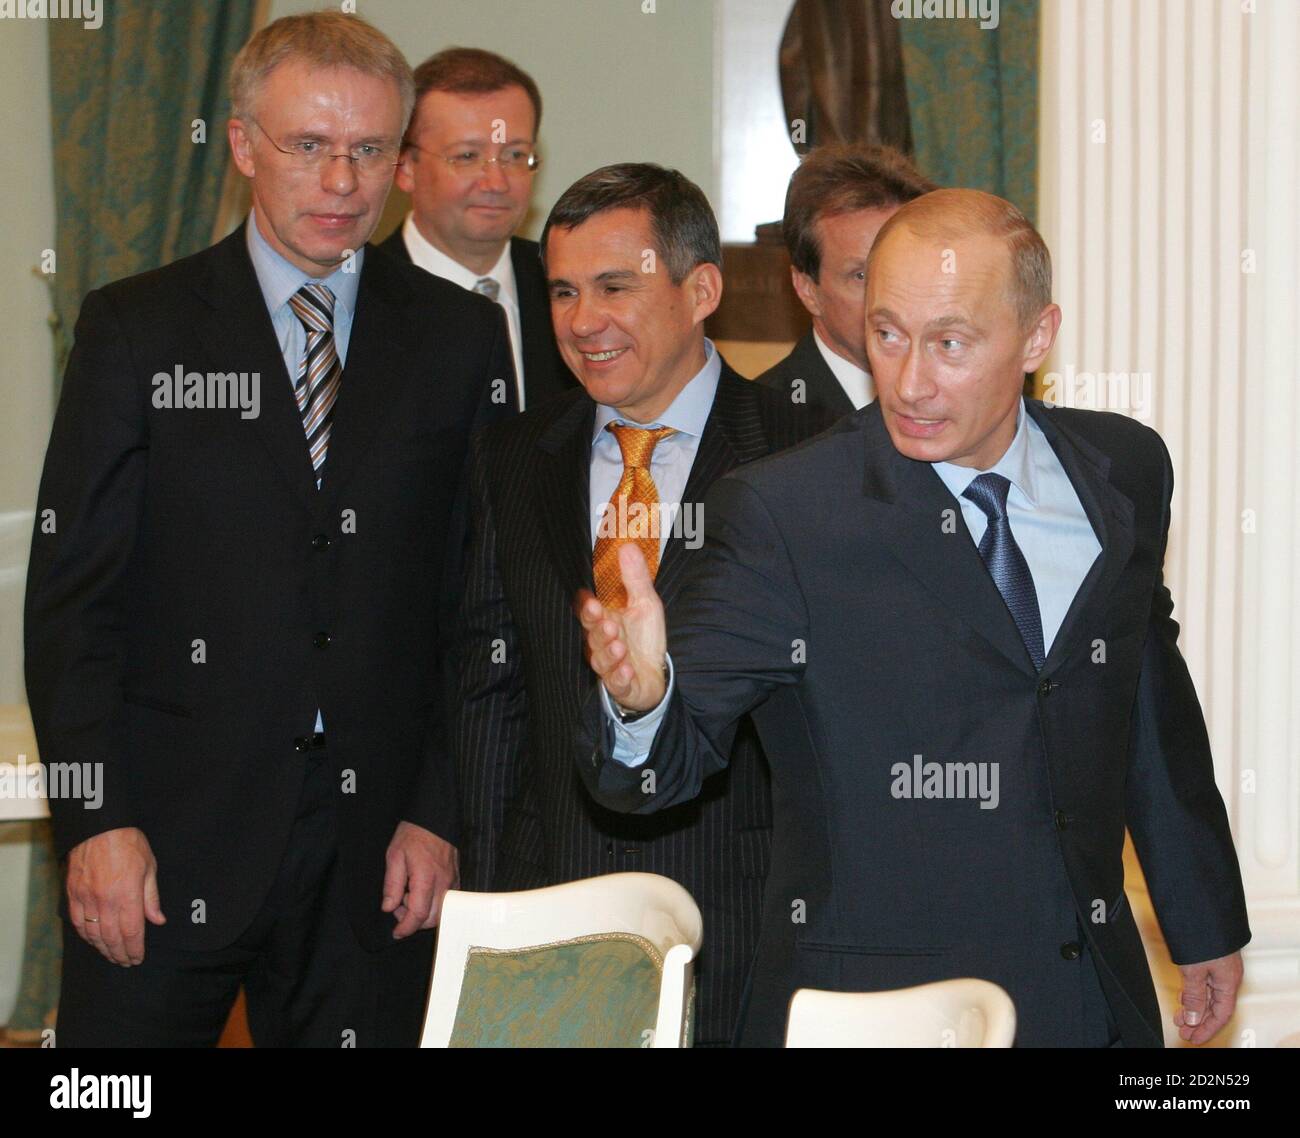 Russian President Vladimir Putin, head of Russian Federal Agency for Sport Vyacheslav Fetisov (L), Deputy Foreign Minister Alexander Yakovenko (2nd L) and Prime Minister of Tatarstan Republic Rustam Minnikhanov (3rd L) take their places at the table during their meeting with George Killian, President of The International University Sports Federation in Moscow October 23, 2006.   REUTERS/Alexander Natruskin (RUSSIA) Stock Photo